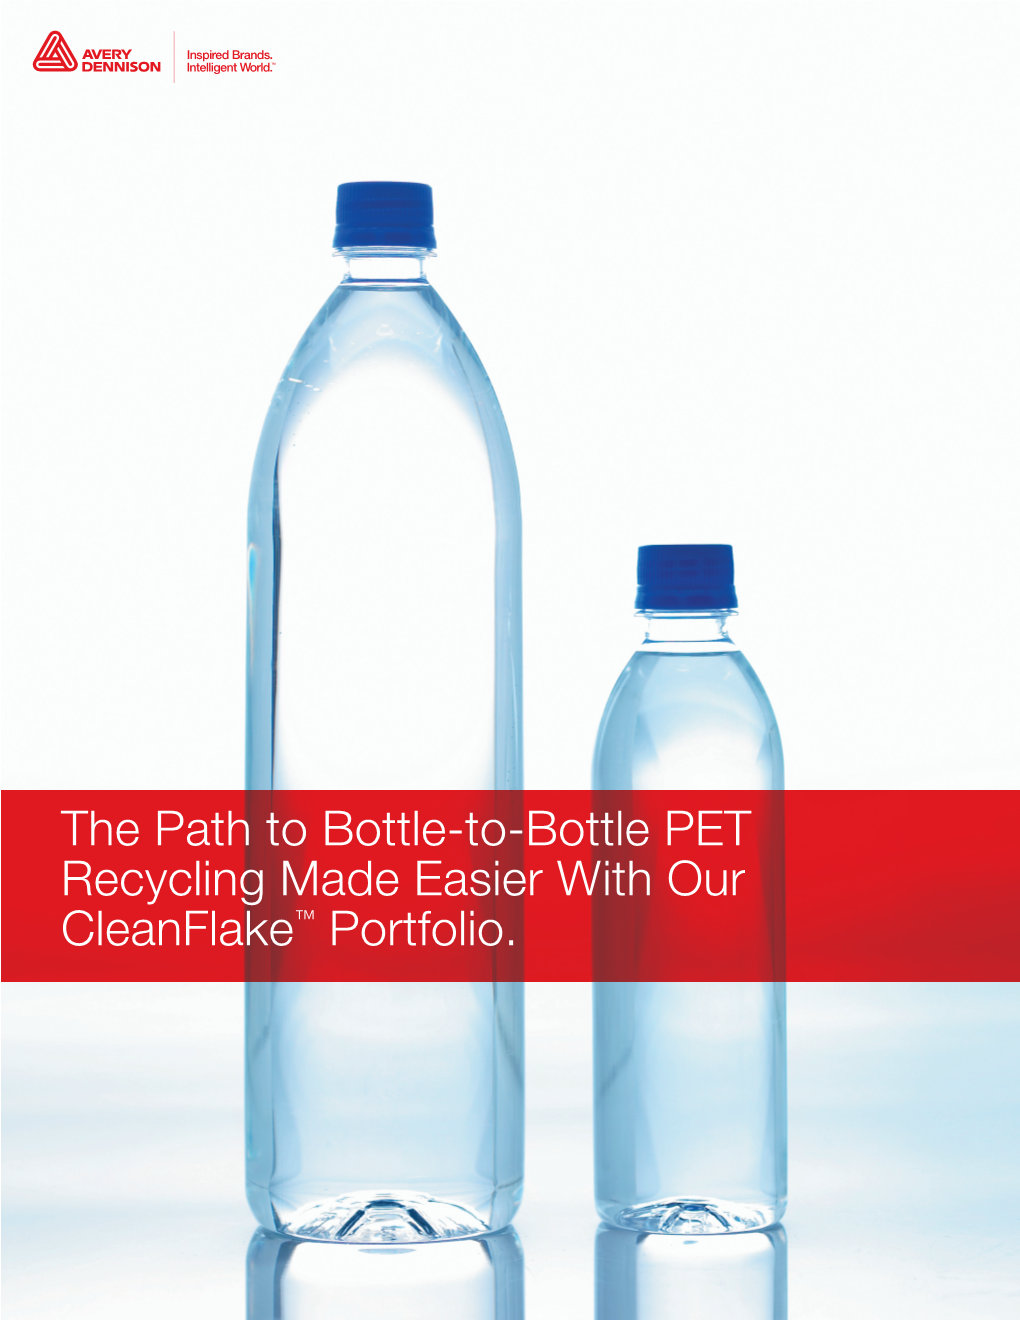 The Path to Bottle-To-Bottle PET Recycling Made Easier with Our Cleanflake™ Portfolio